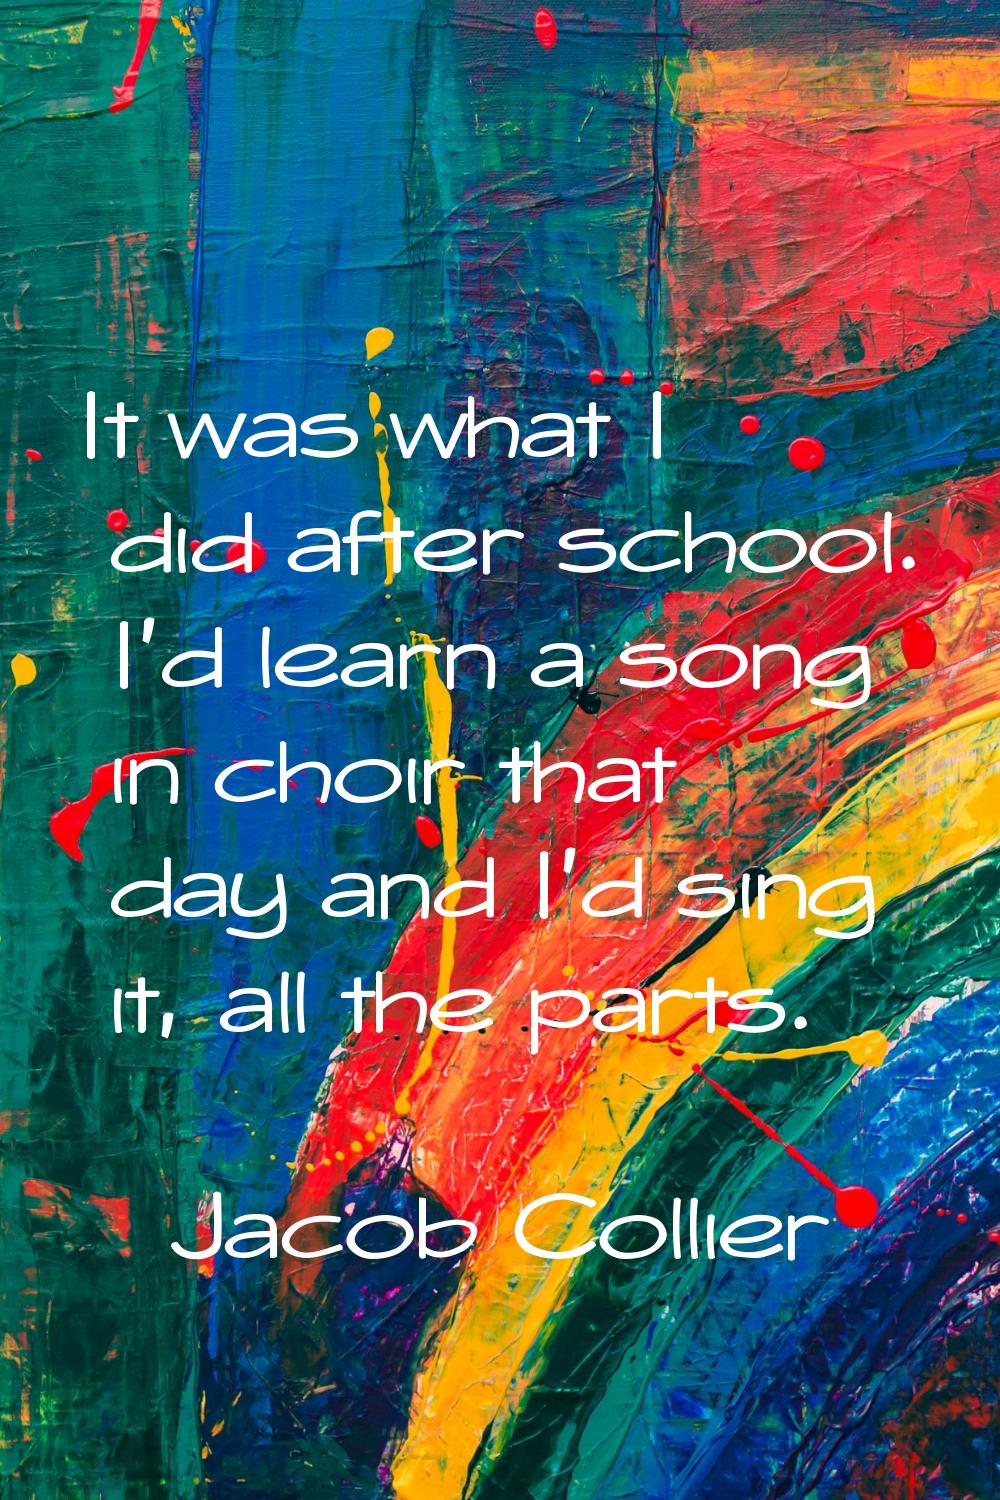 It was what I did after school. I'd learn a song in choir that day and I'd sing it, all the parts.